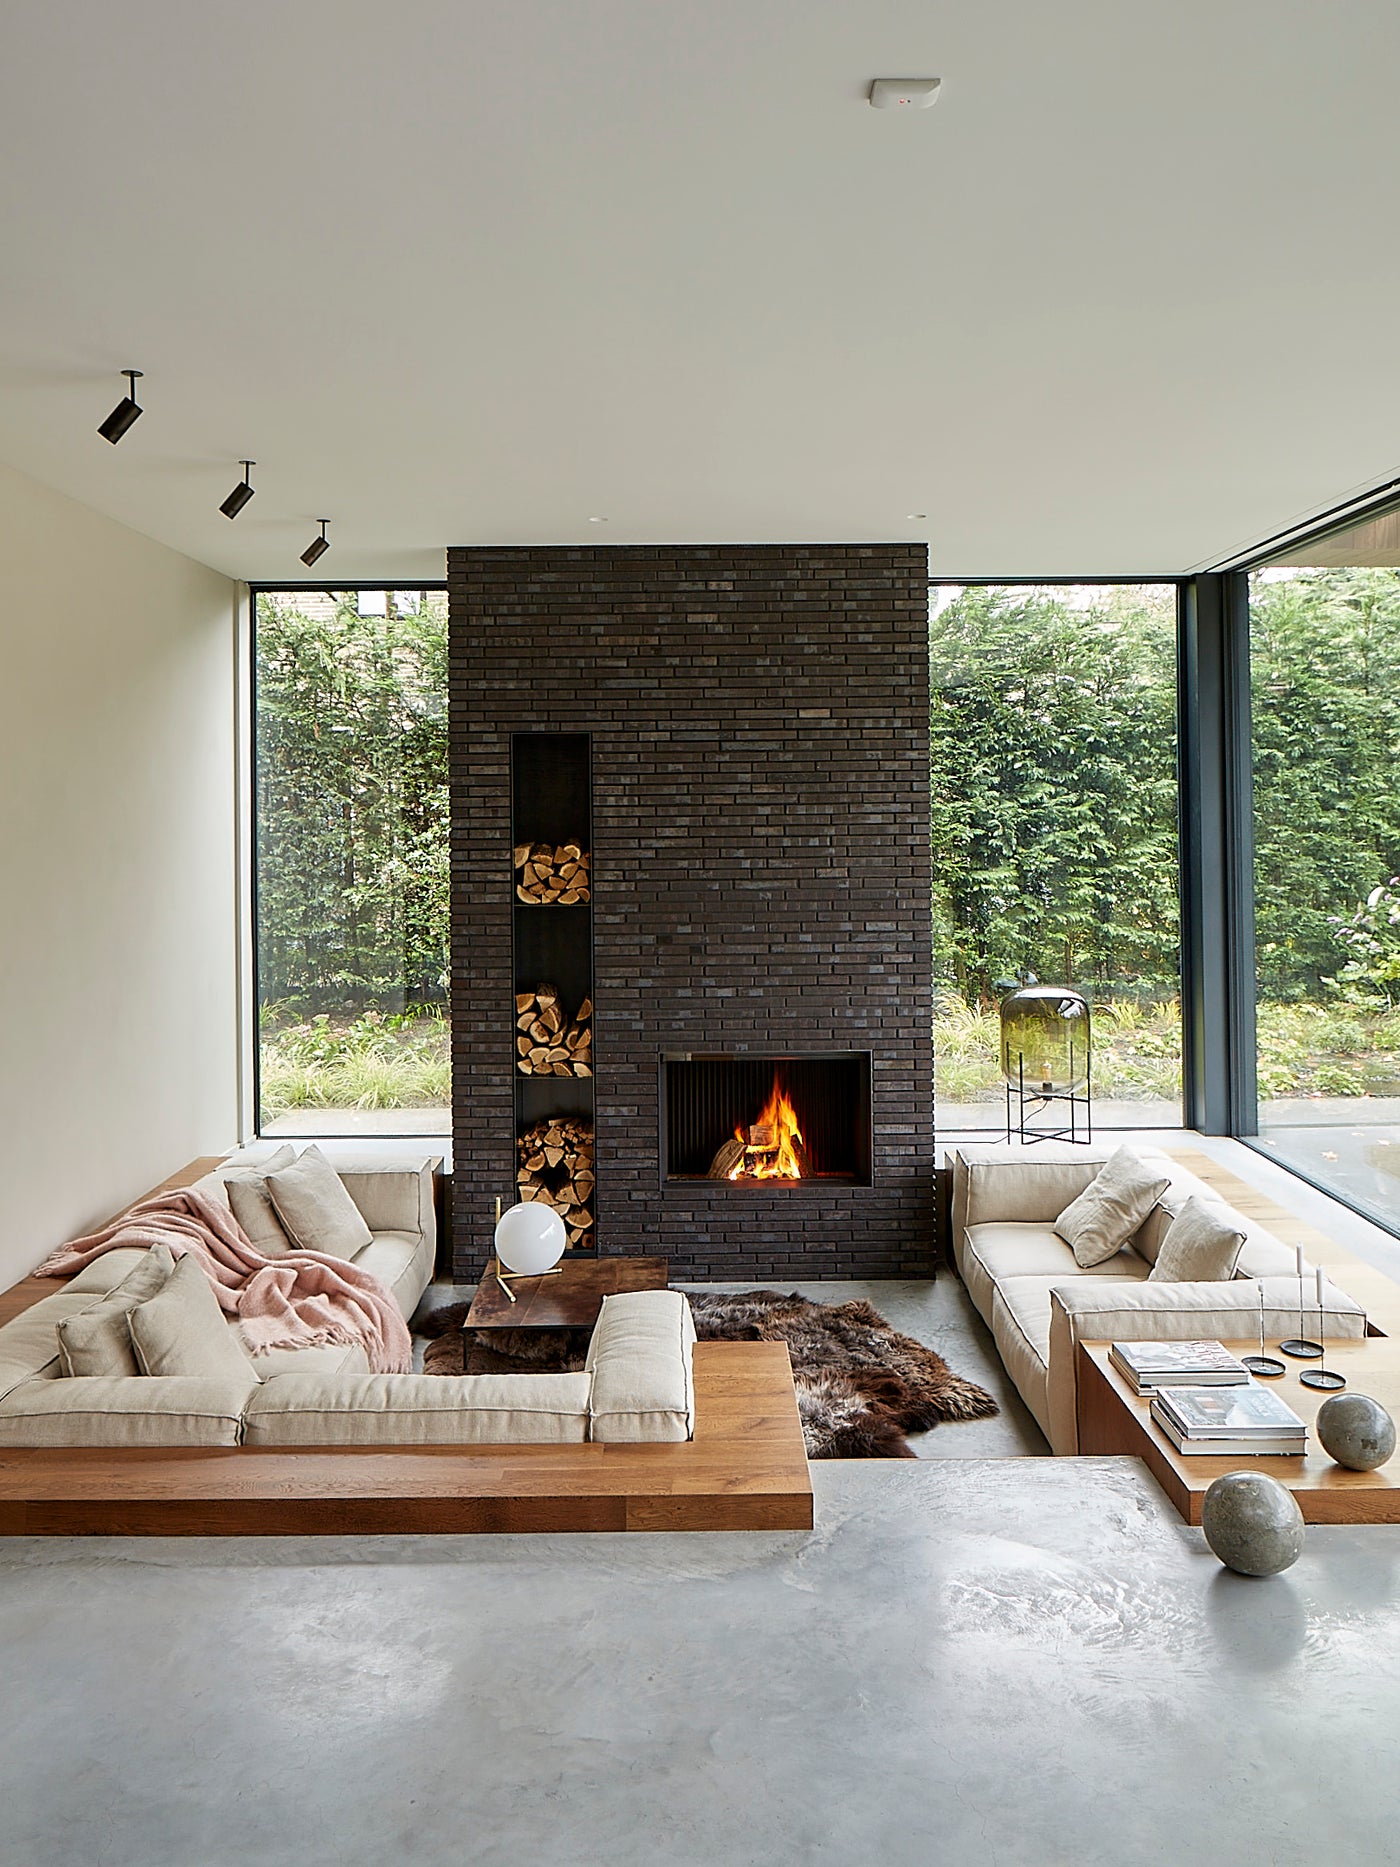 Sunken living room area with windows and fire place - Artempo Interior Architecture Design - Kasia Gatkowska for ELLE